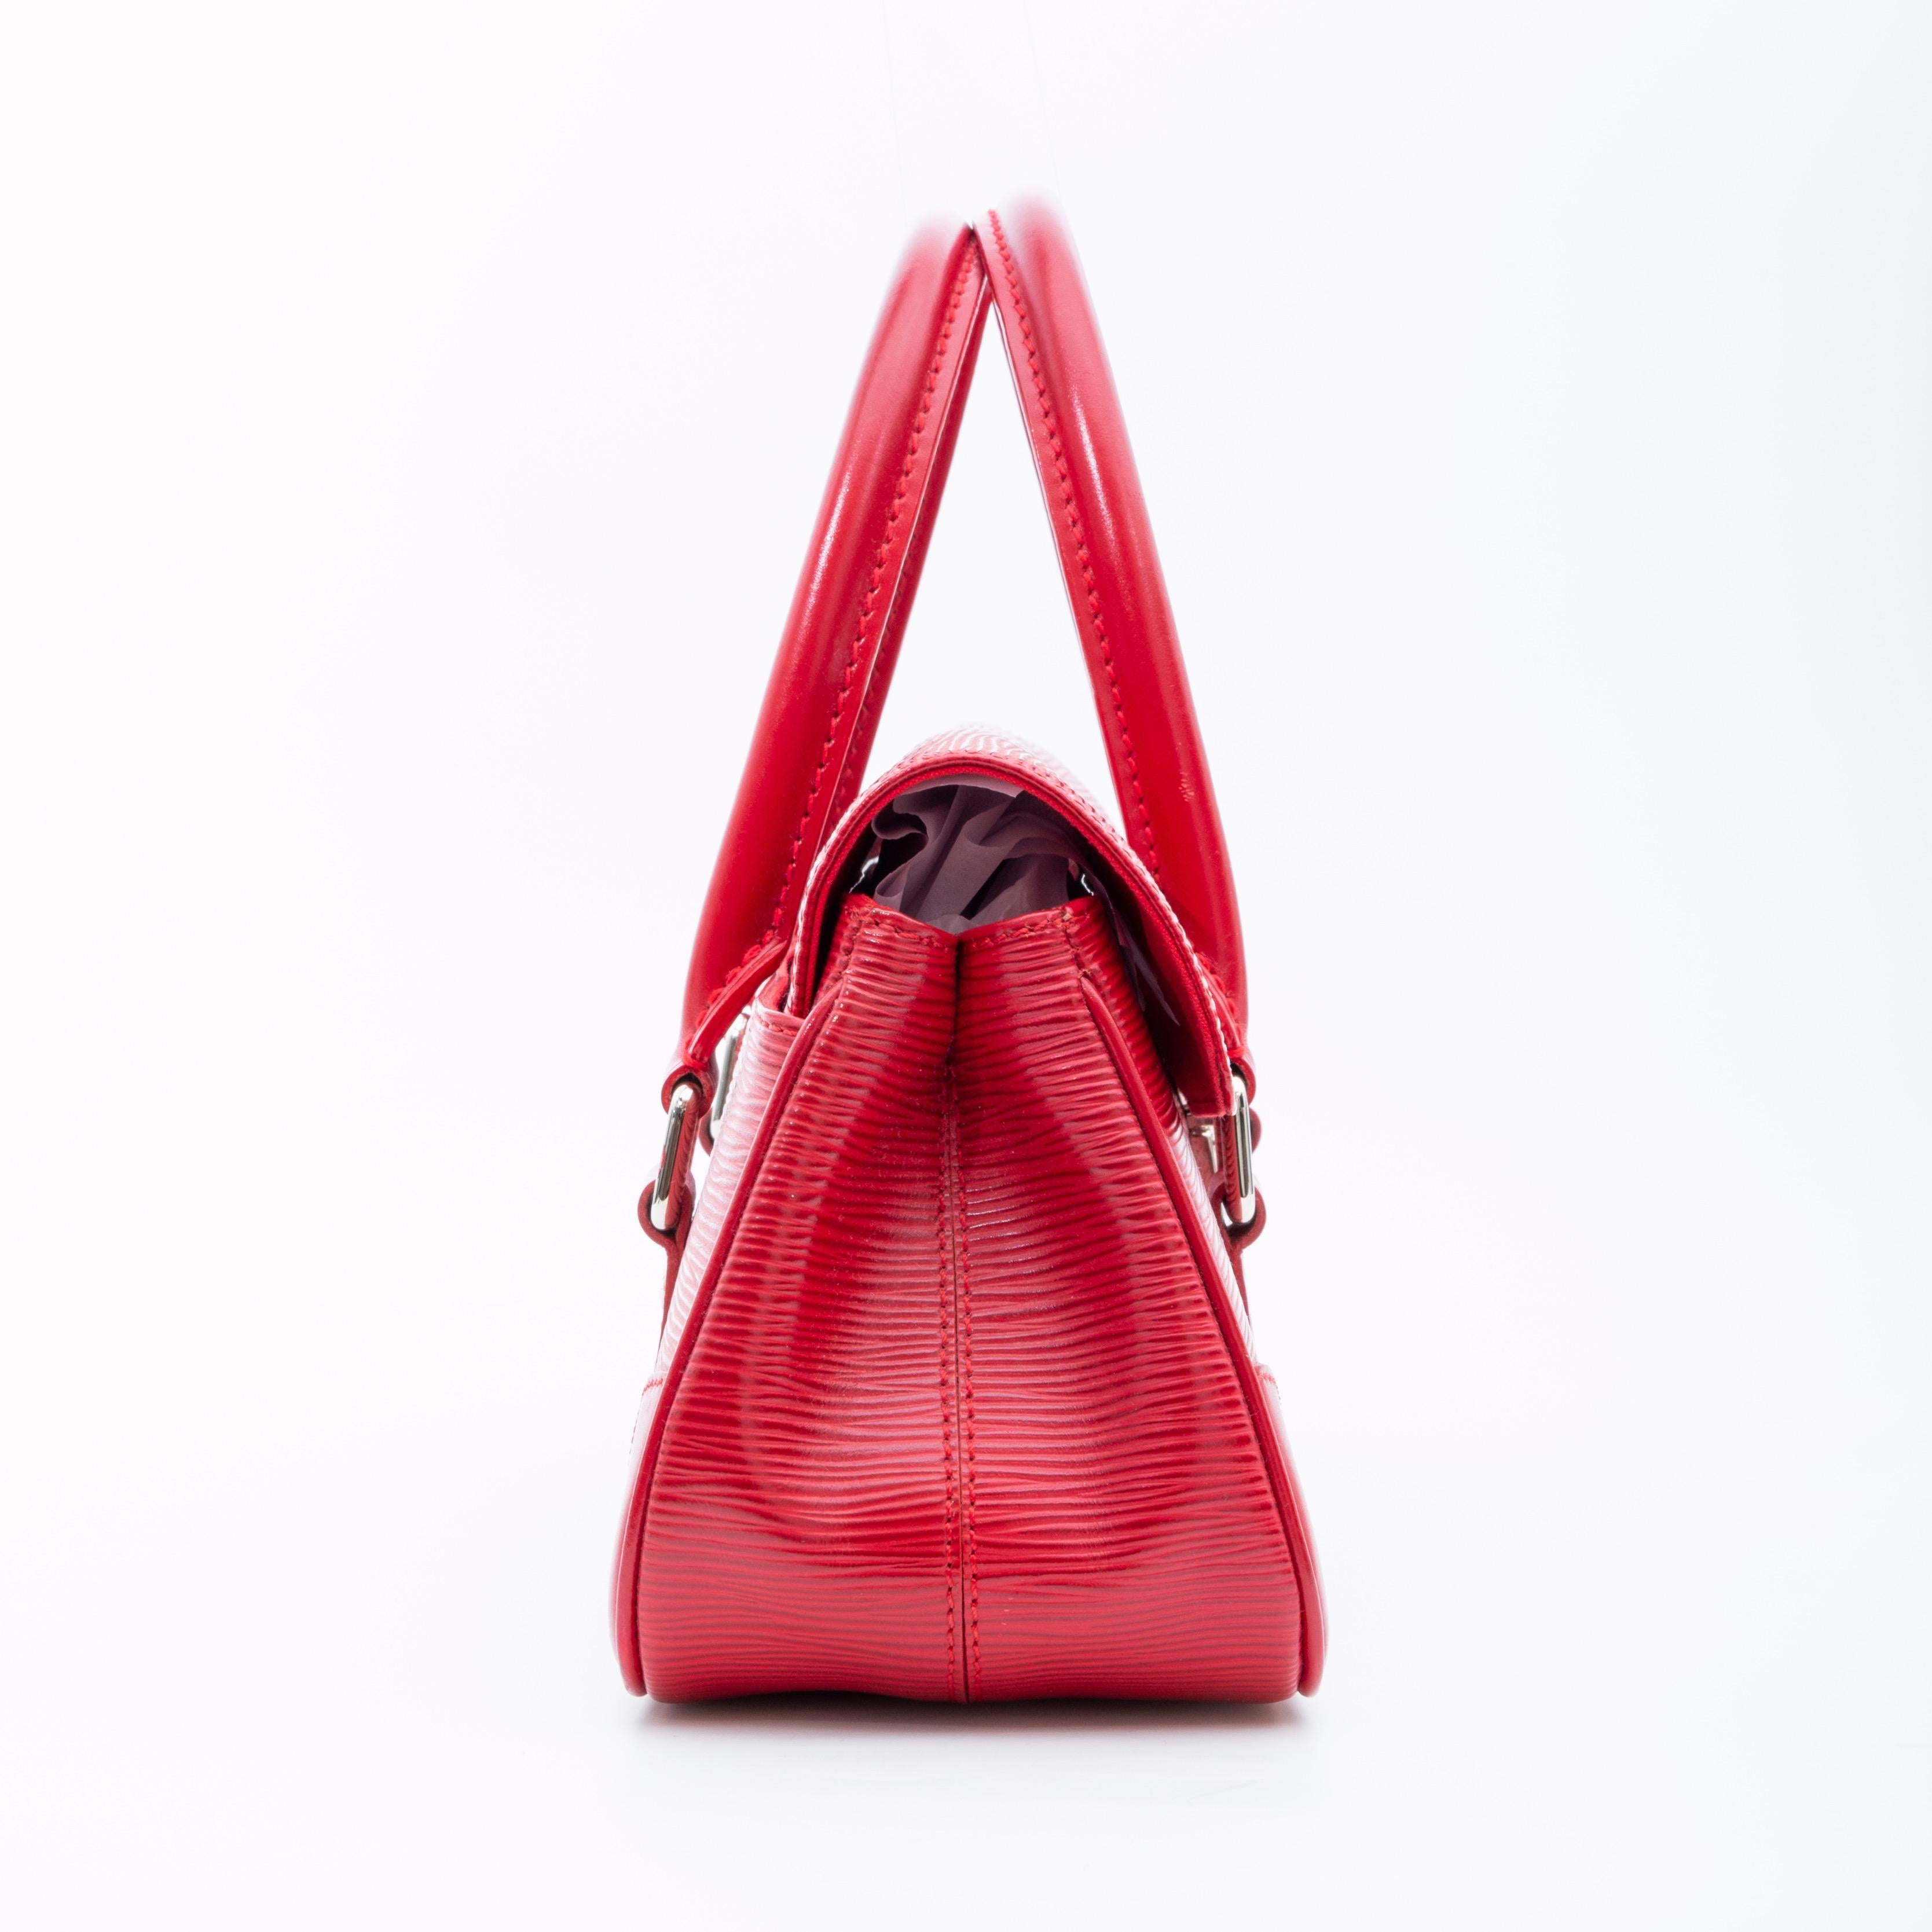 COLOR: Red
MATERIAL: Epi leather
DATE CODE: CE 1005
MEASURES: H 6.5” x L 11” x D 4”
DROP: 6”
COMES WITH: Dust bag
CONDITION: Excellent - bag was professionally cleaned and looks pristine.

Made in Italy